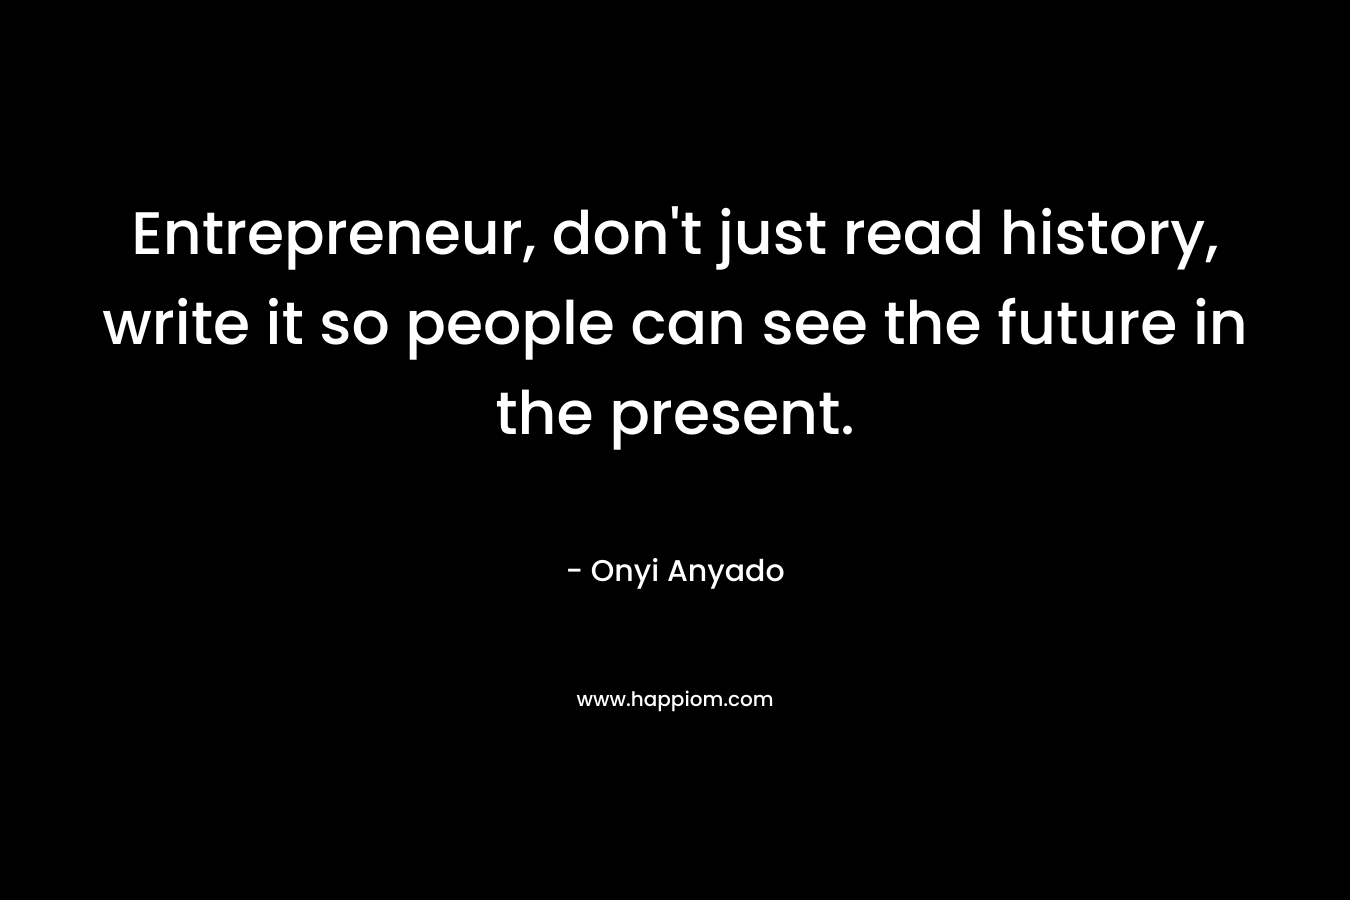 Entrepreneur, don't just read history, write it so people can see the future in the present.